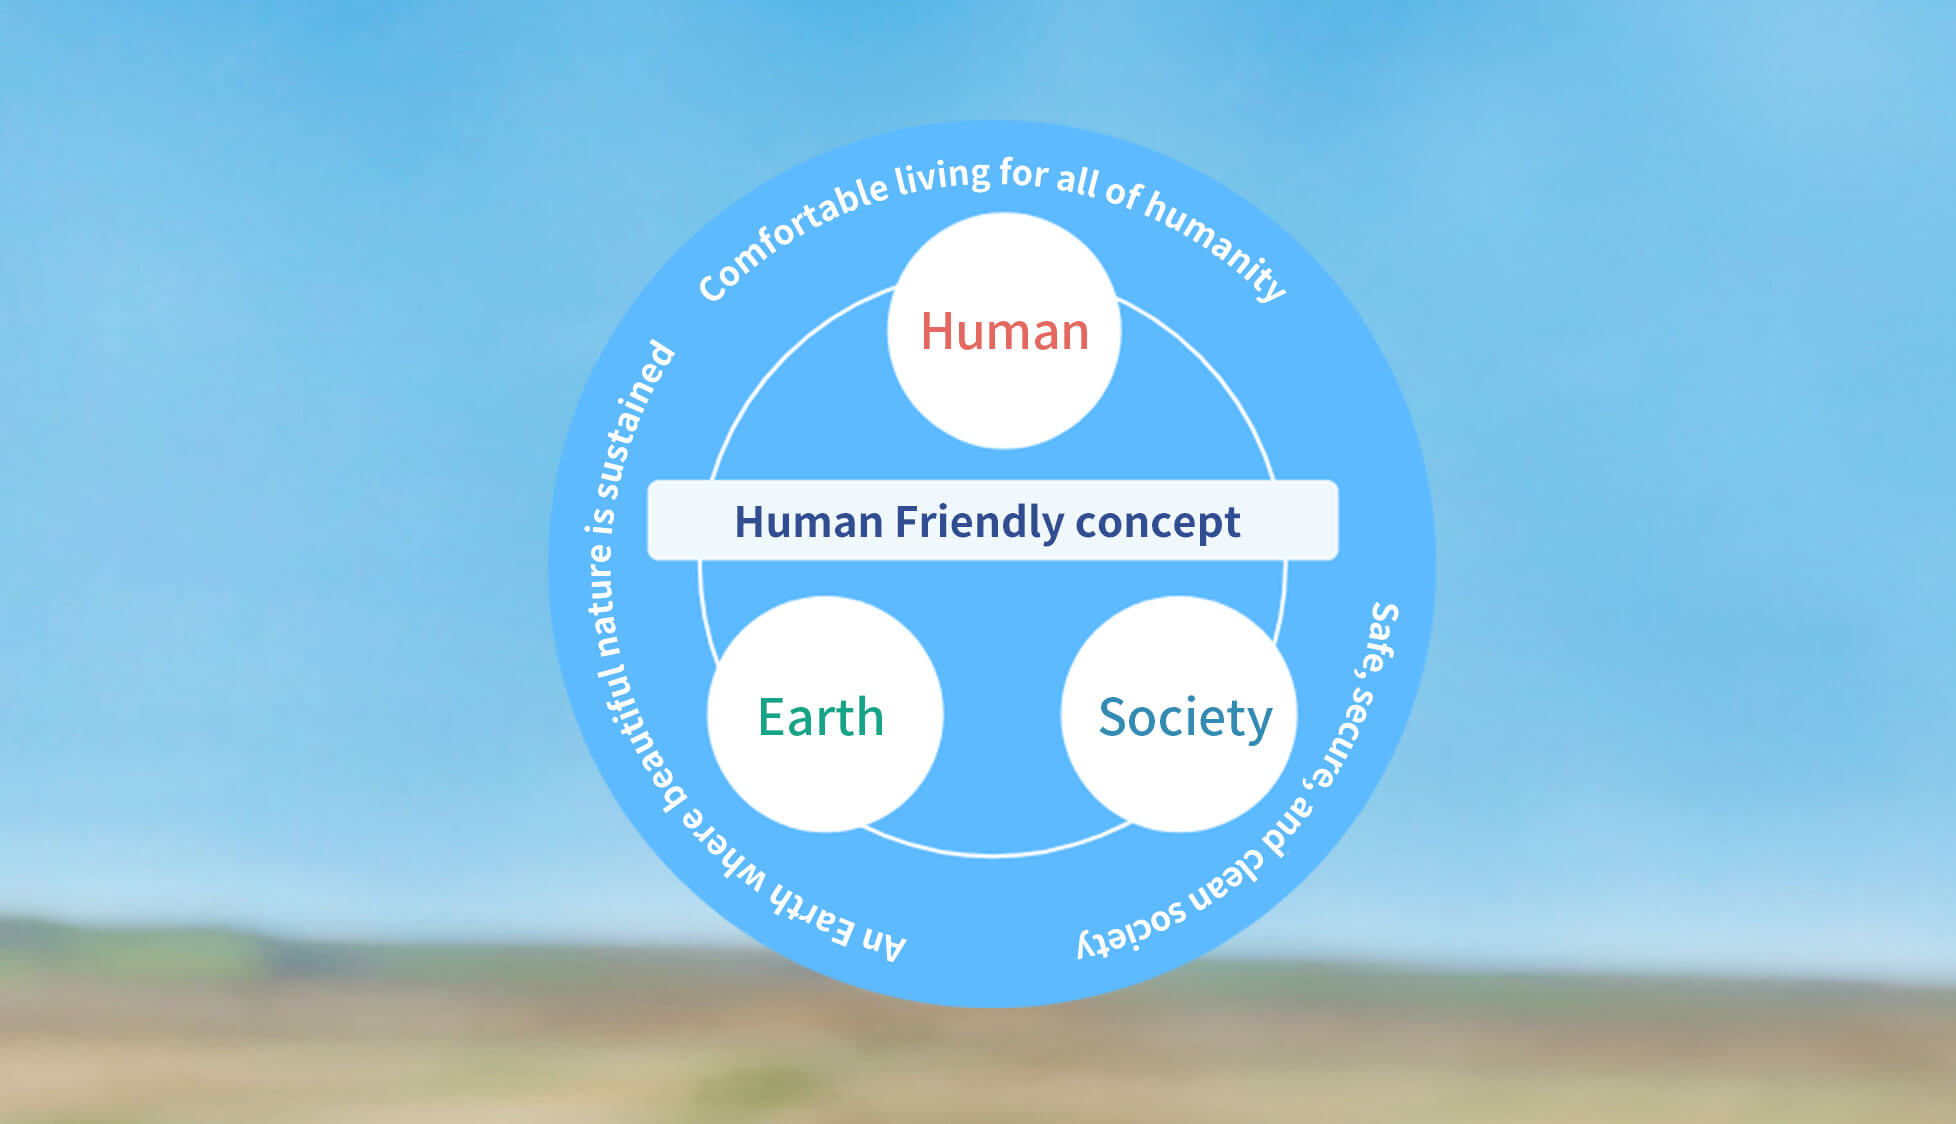 Human Friendly concept. Human: Comfortable living for all of humanity.  Earth: An Earth where beautiful nature is sustained. Society: Safe, secure, and clean society.